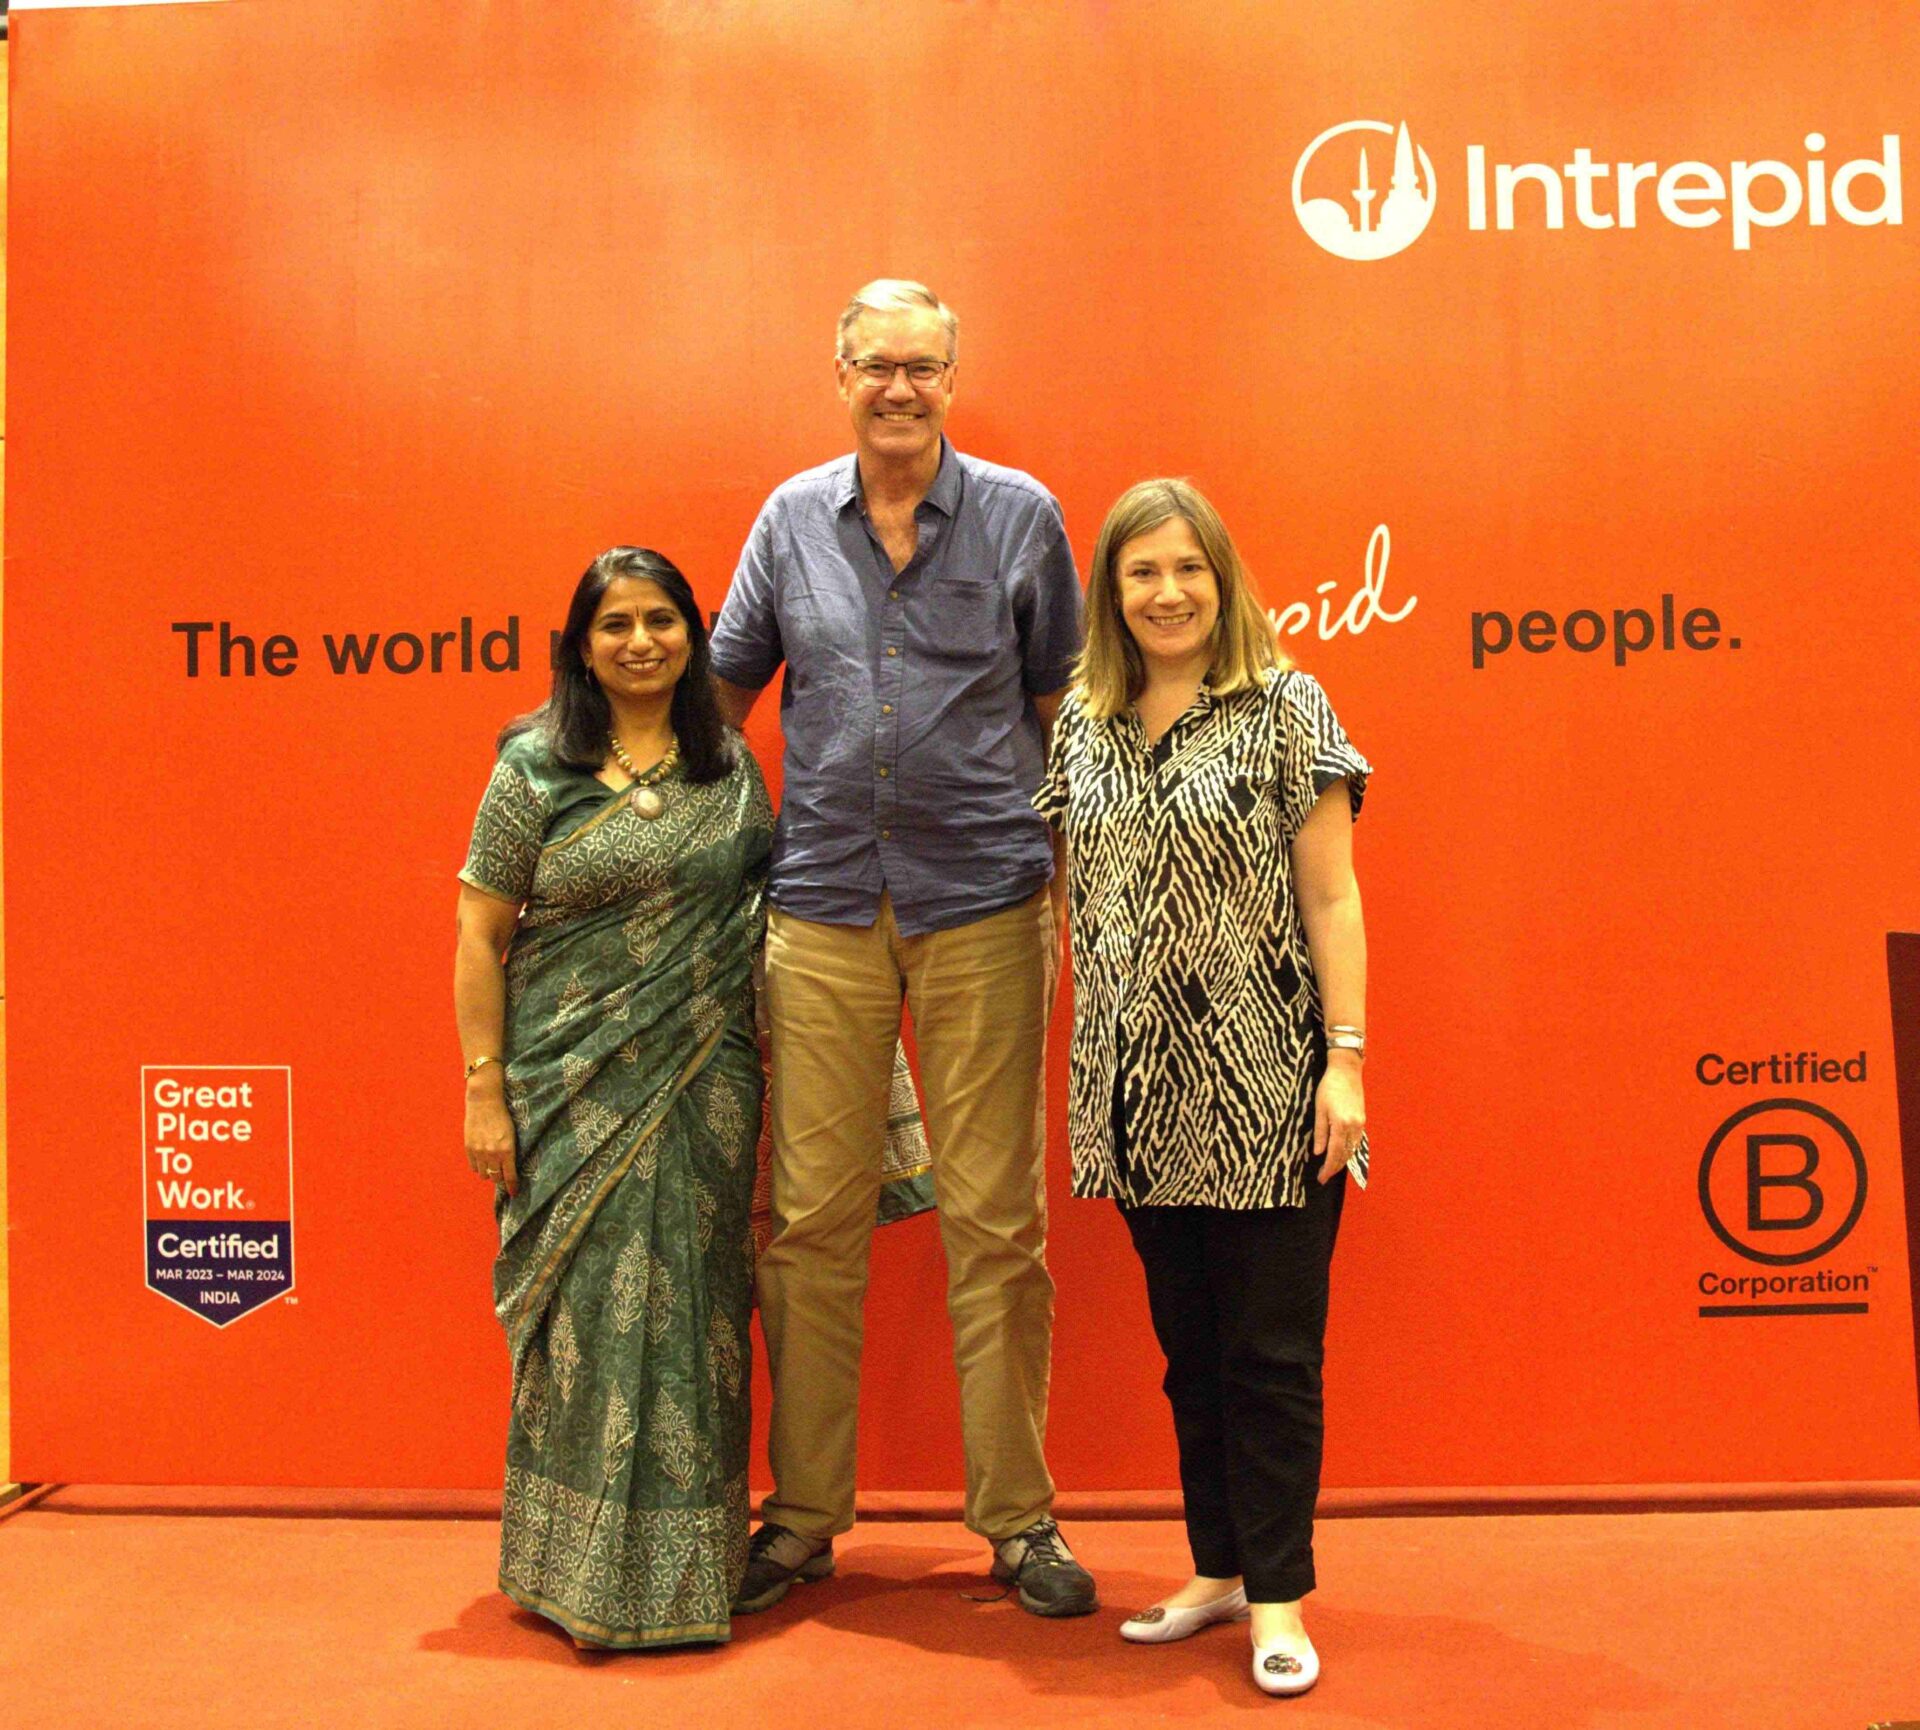 Intrepid travel unveils ambitious 2030 strategy, mentions India as key destination